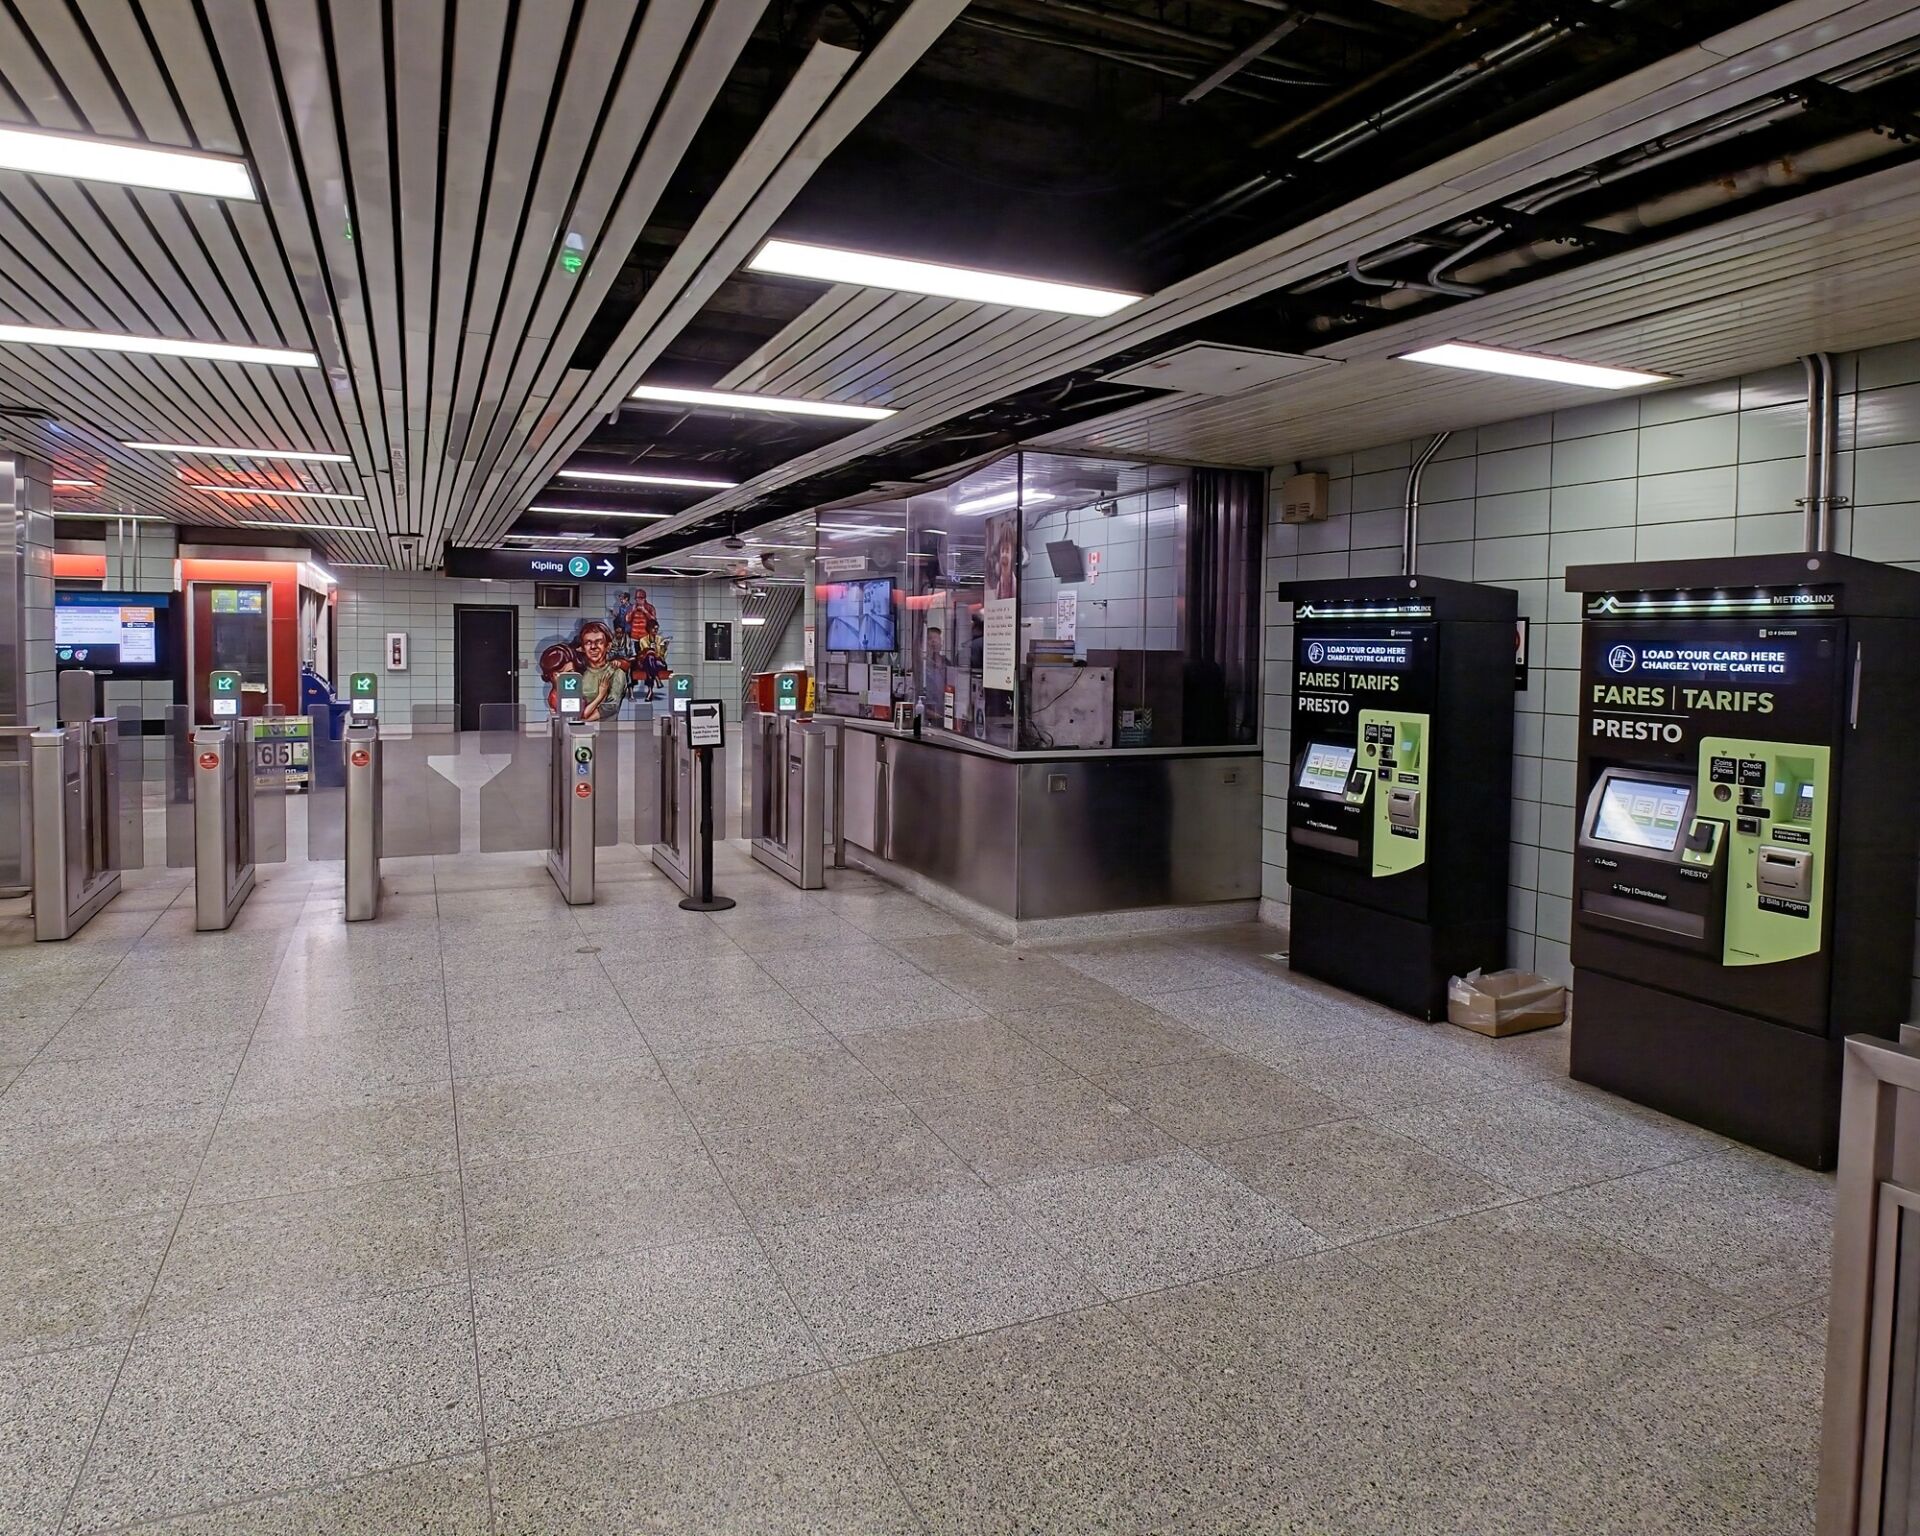 Pay gates and presto card recharge stations